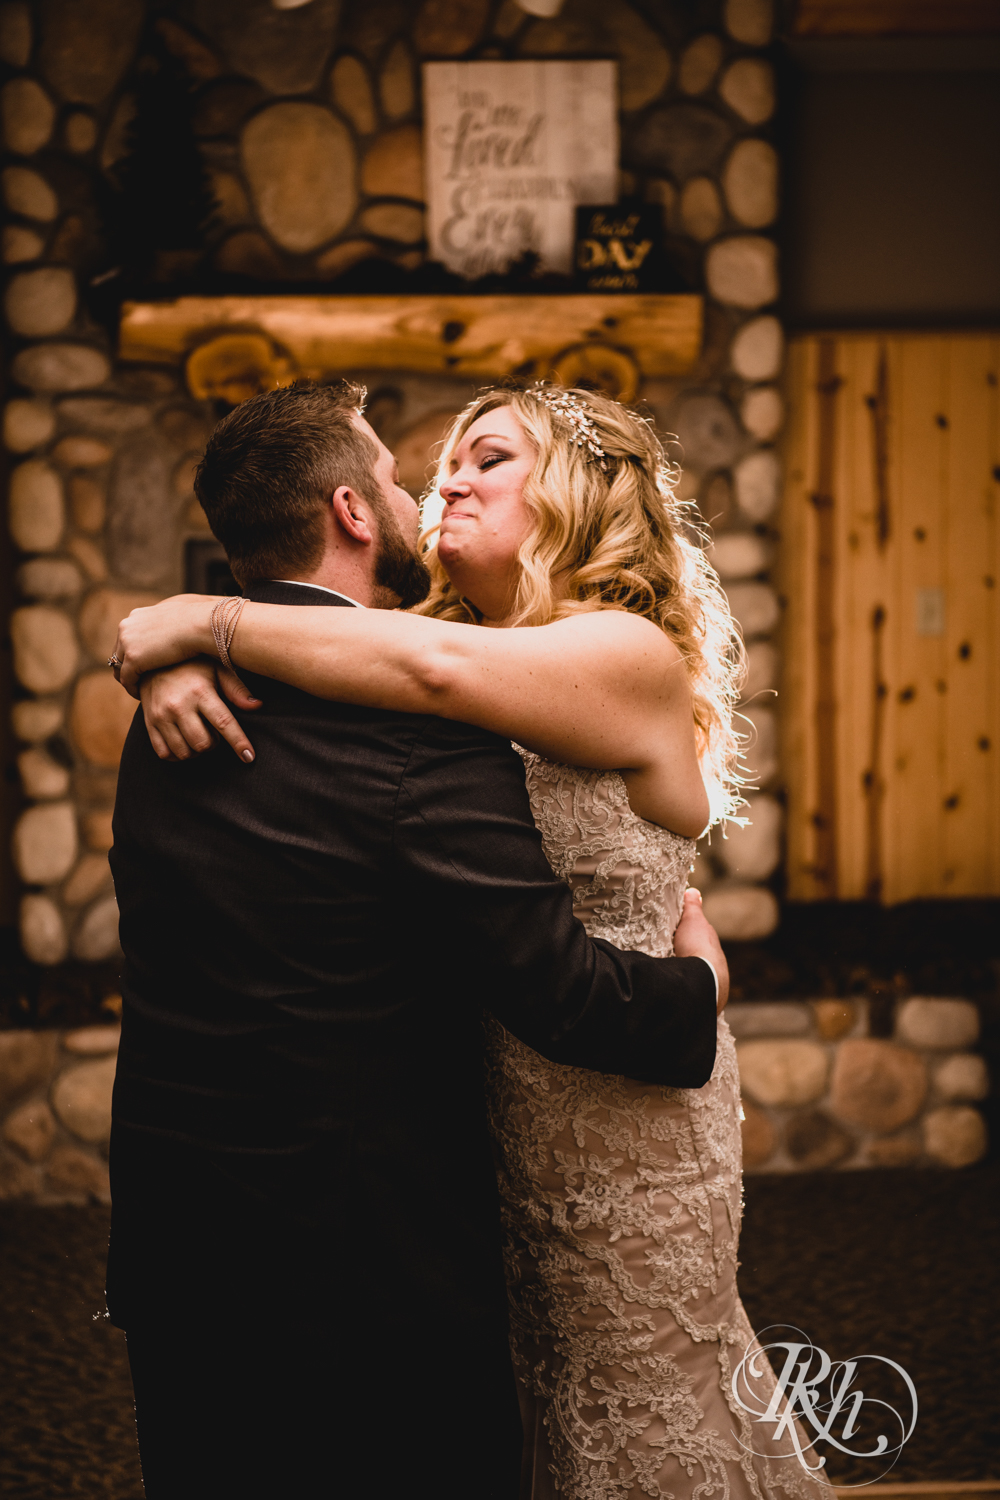 Bride and groom have first dance during winter wedding reception at Whitefish Lodge in Crosslake, Minnesota.